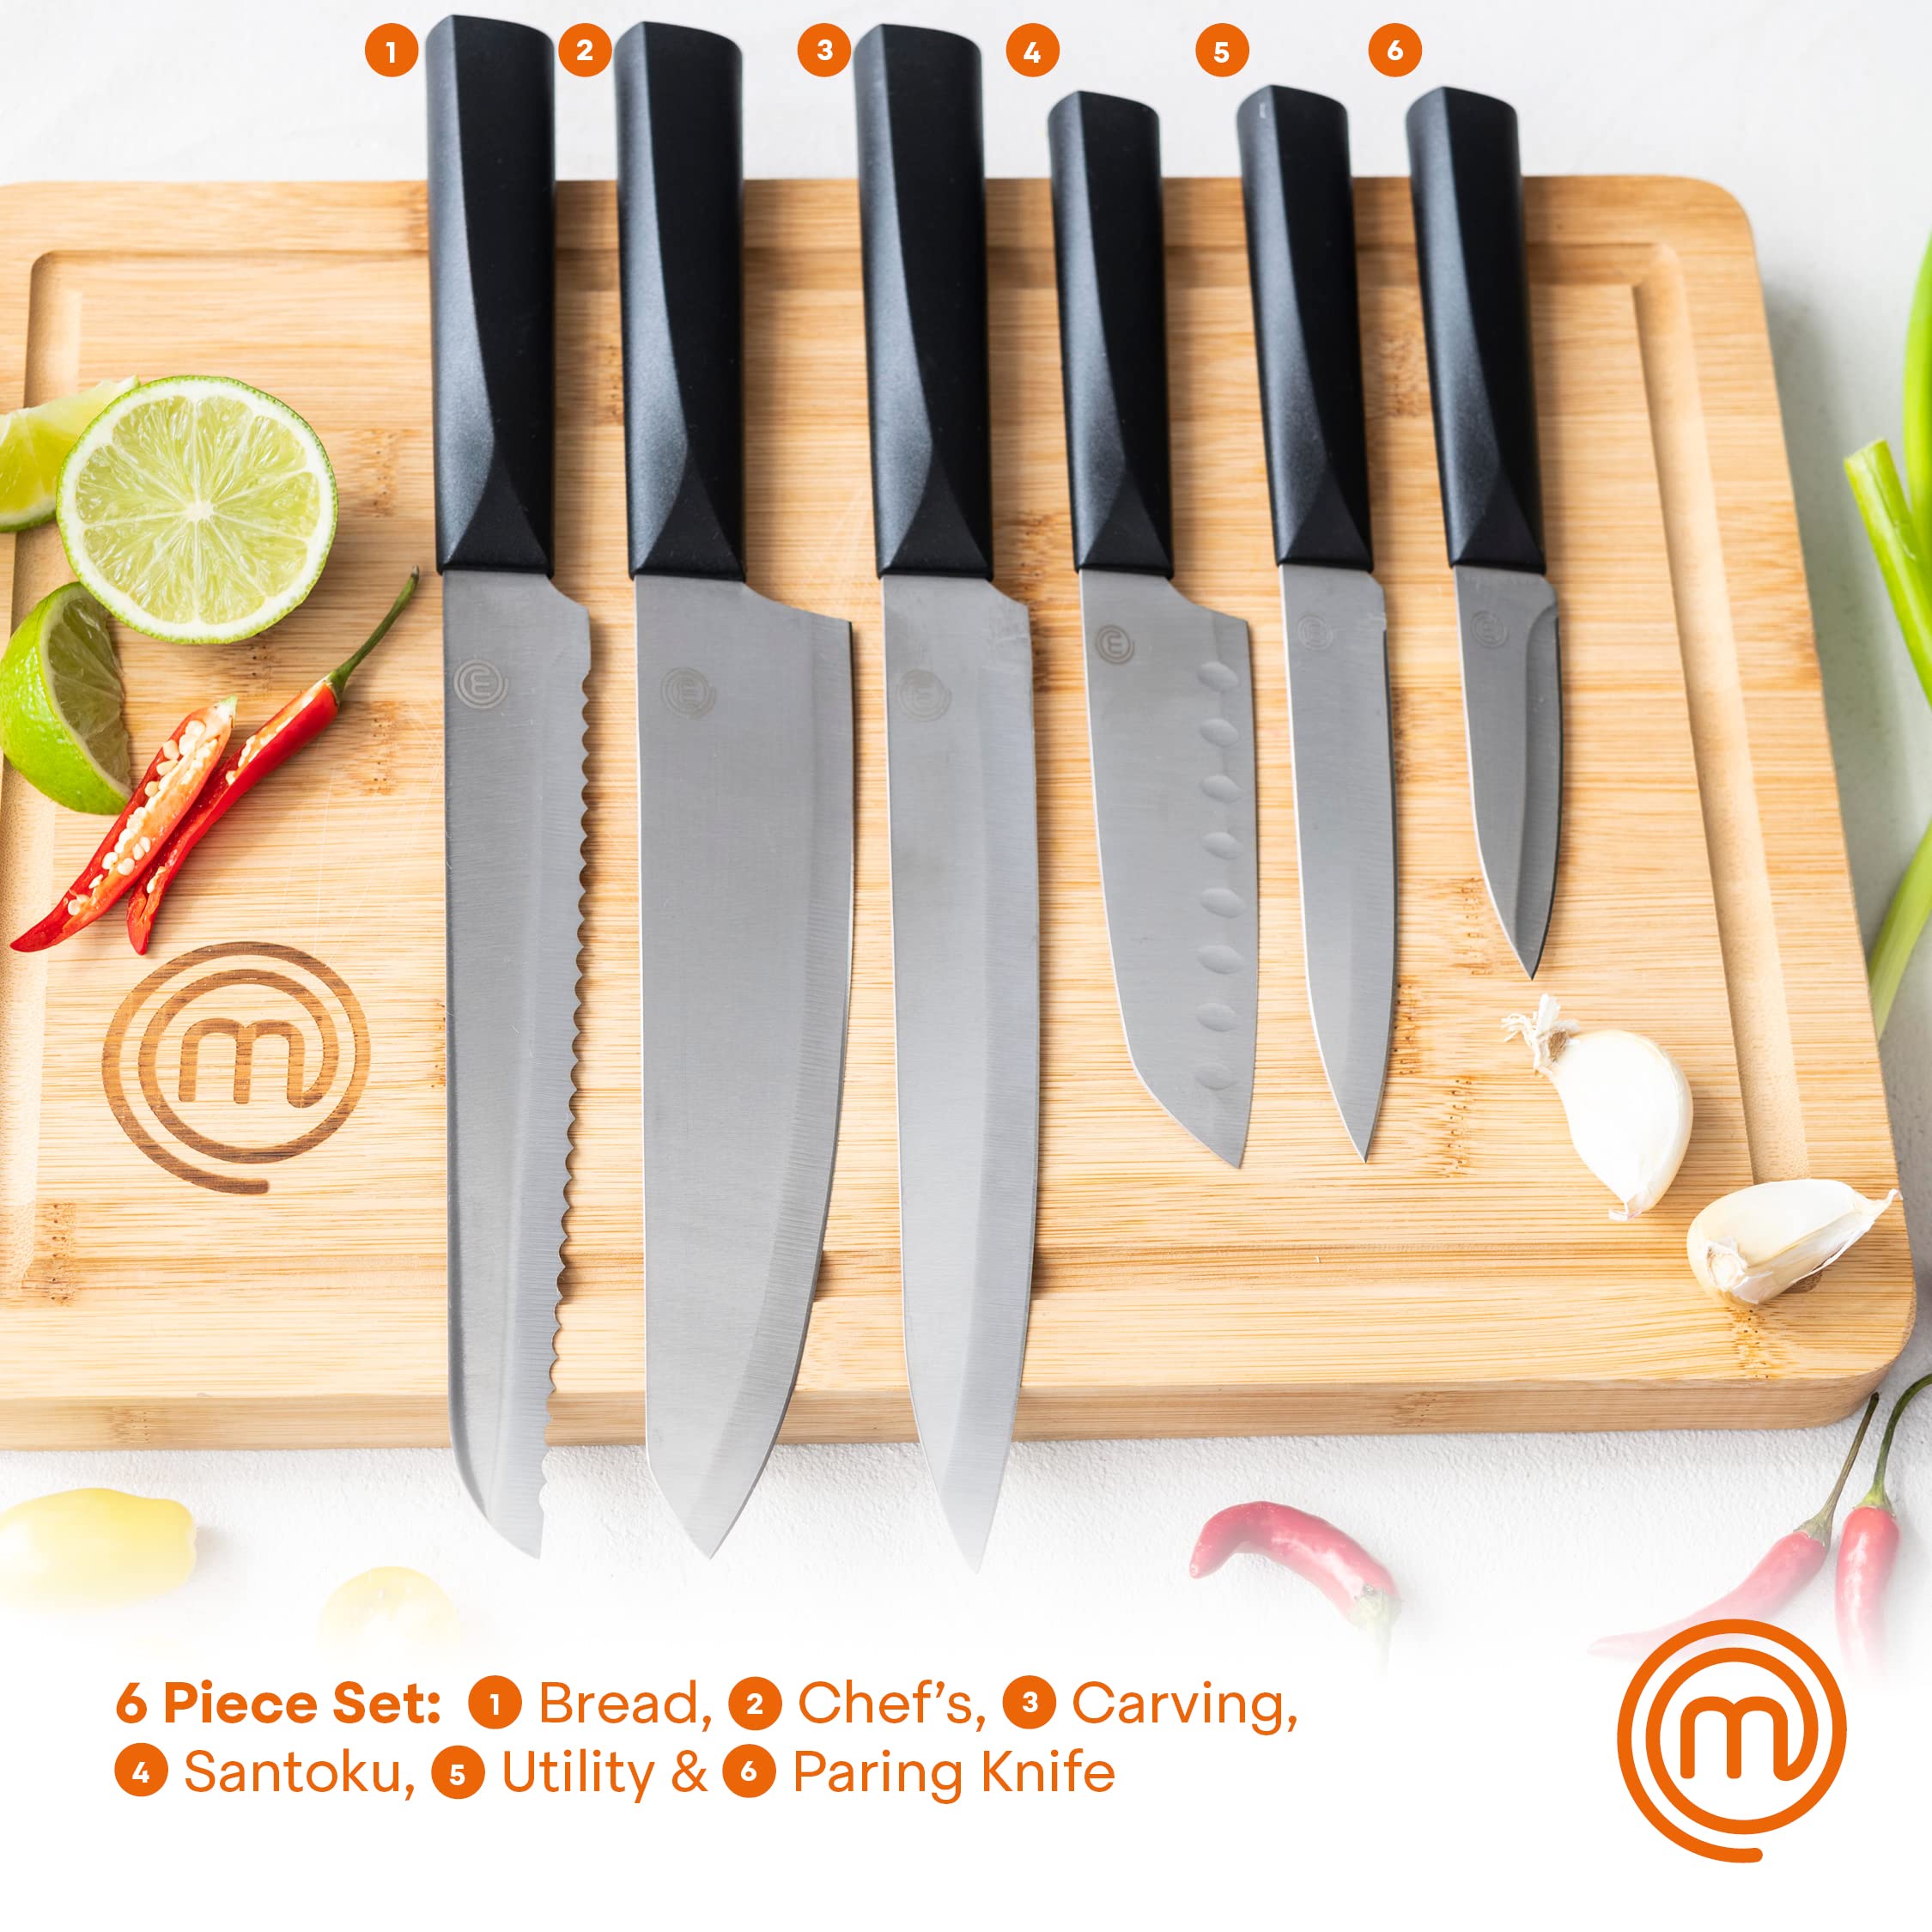 MasterChef Japanese Knife Set of 6 Kitchen Knives (Chef, Utility, Paring, Boning, Bread & Santoku) with Extra Sharp Stainless Steel Blades for Professional Cutting & Chopping, Stylish Black Handles